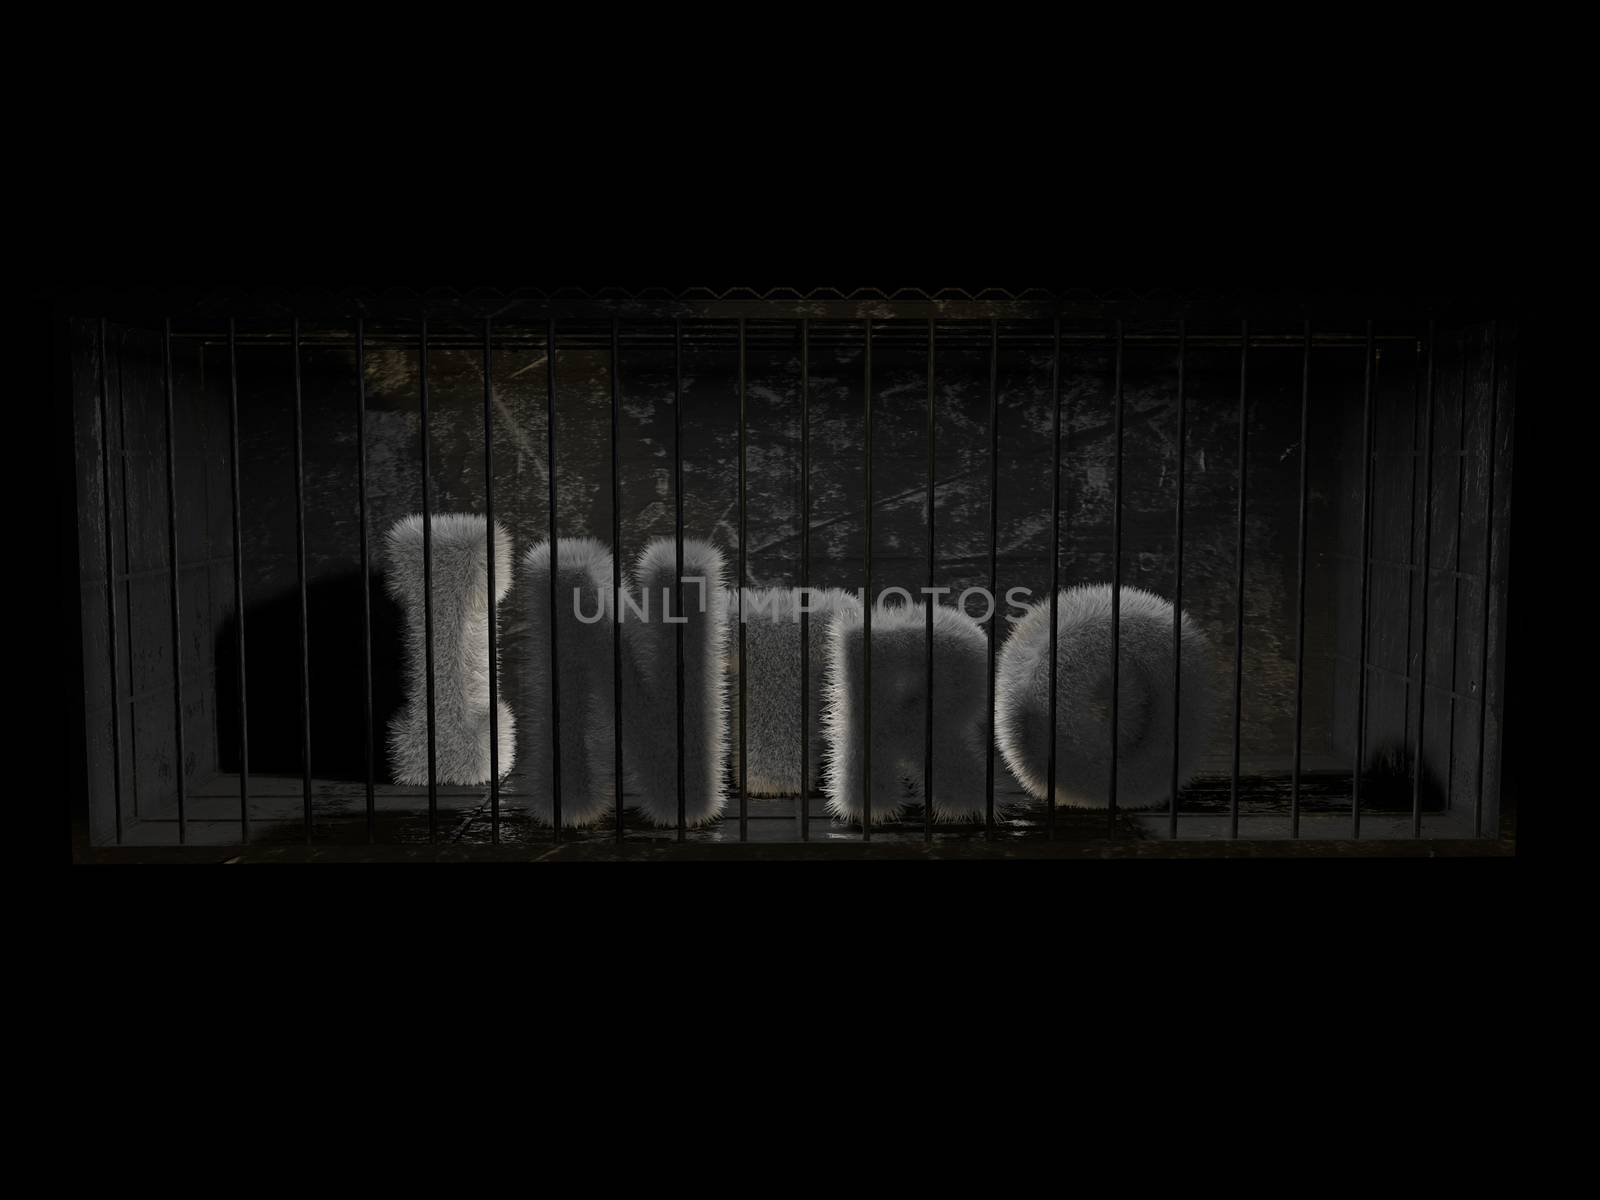 A fluffy word (intro) with white hair behind bars with black background.